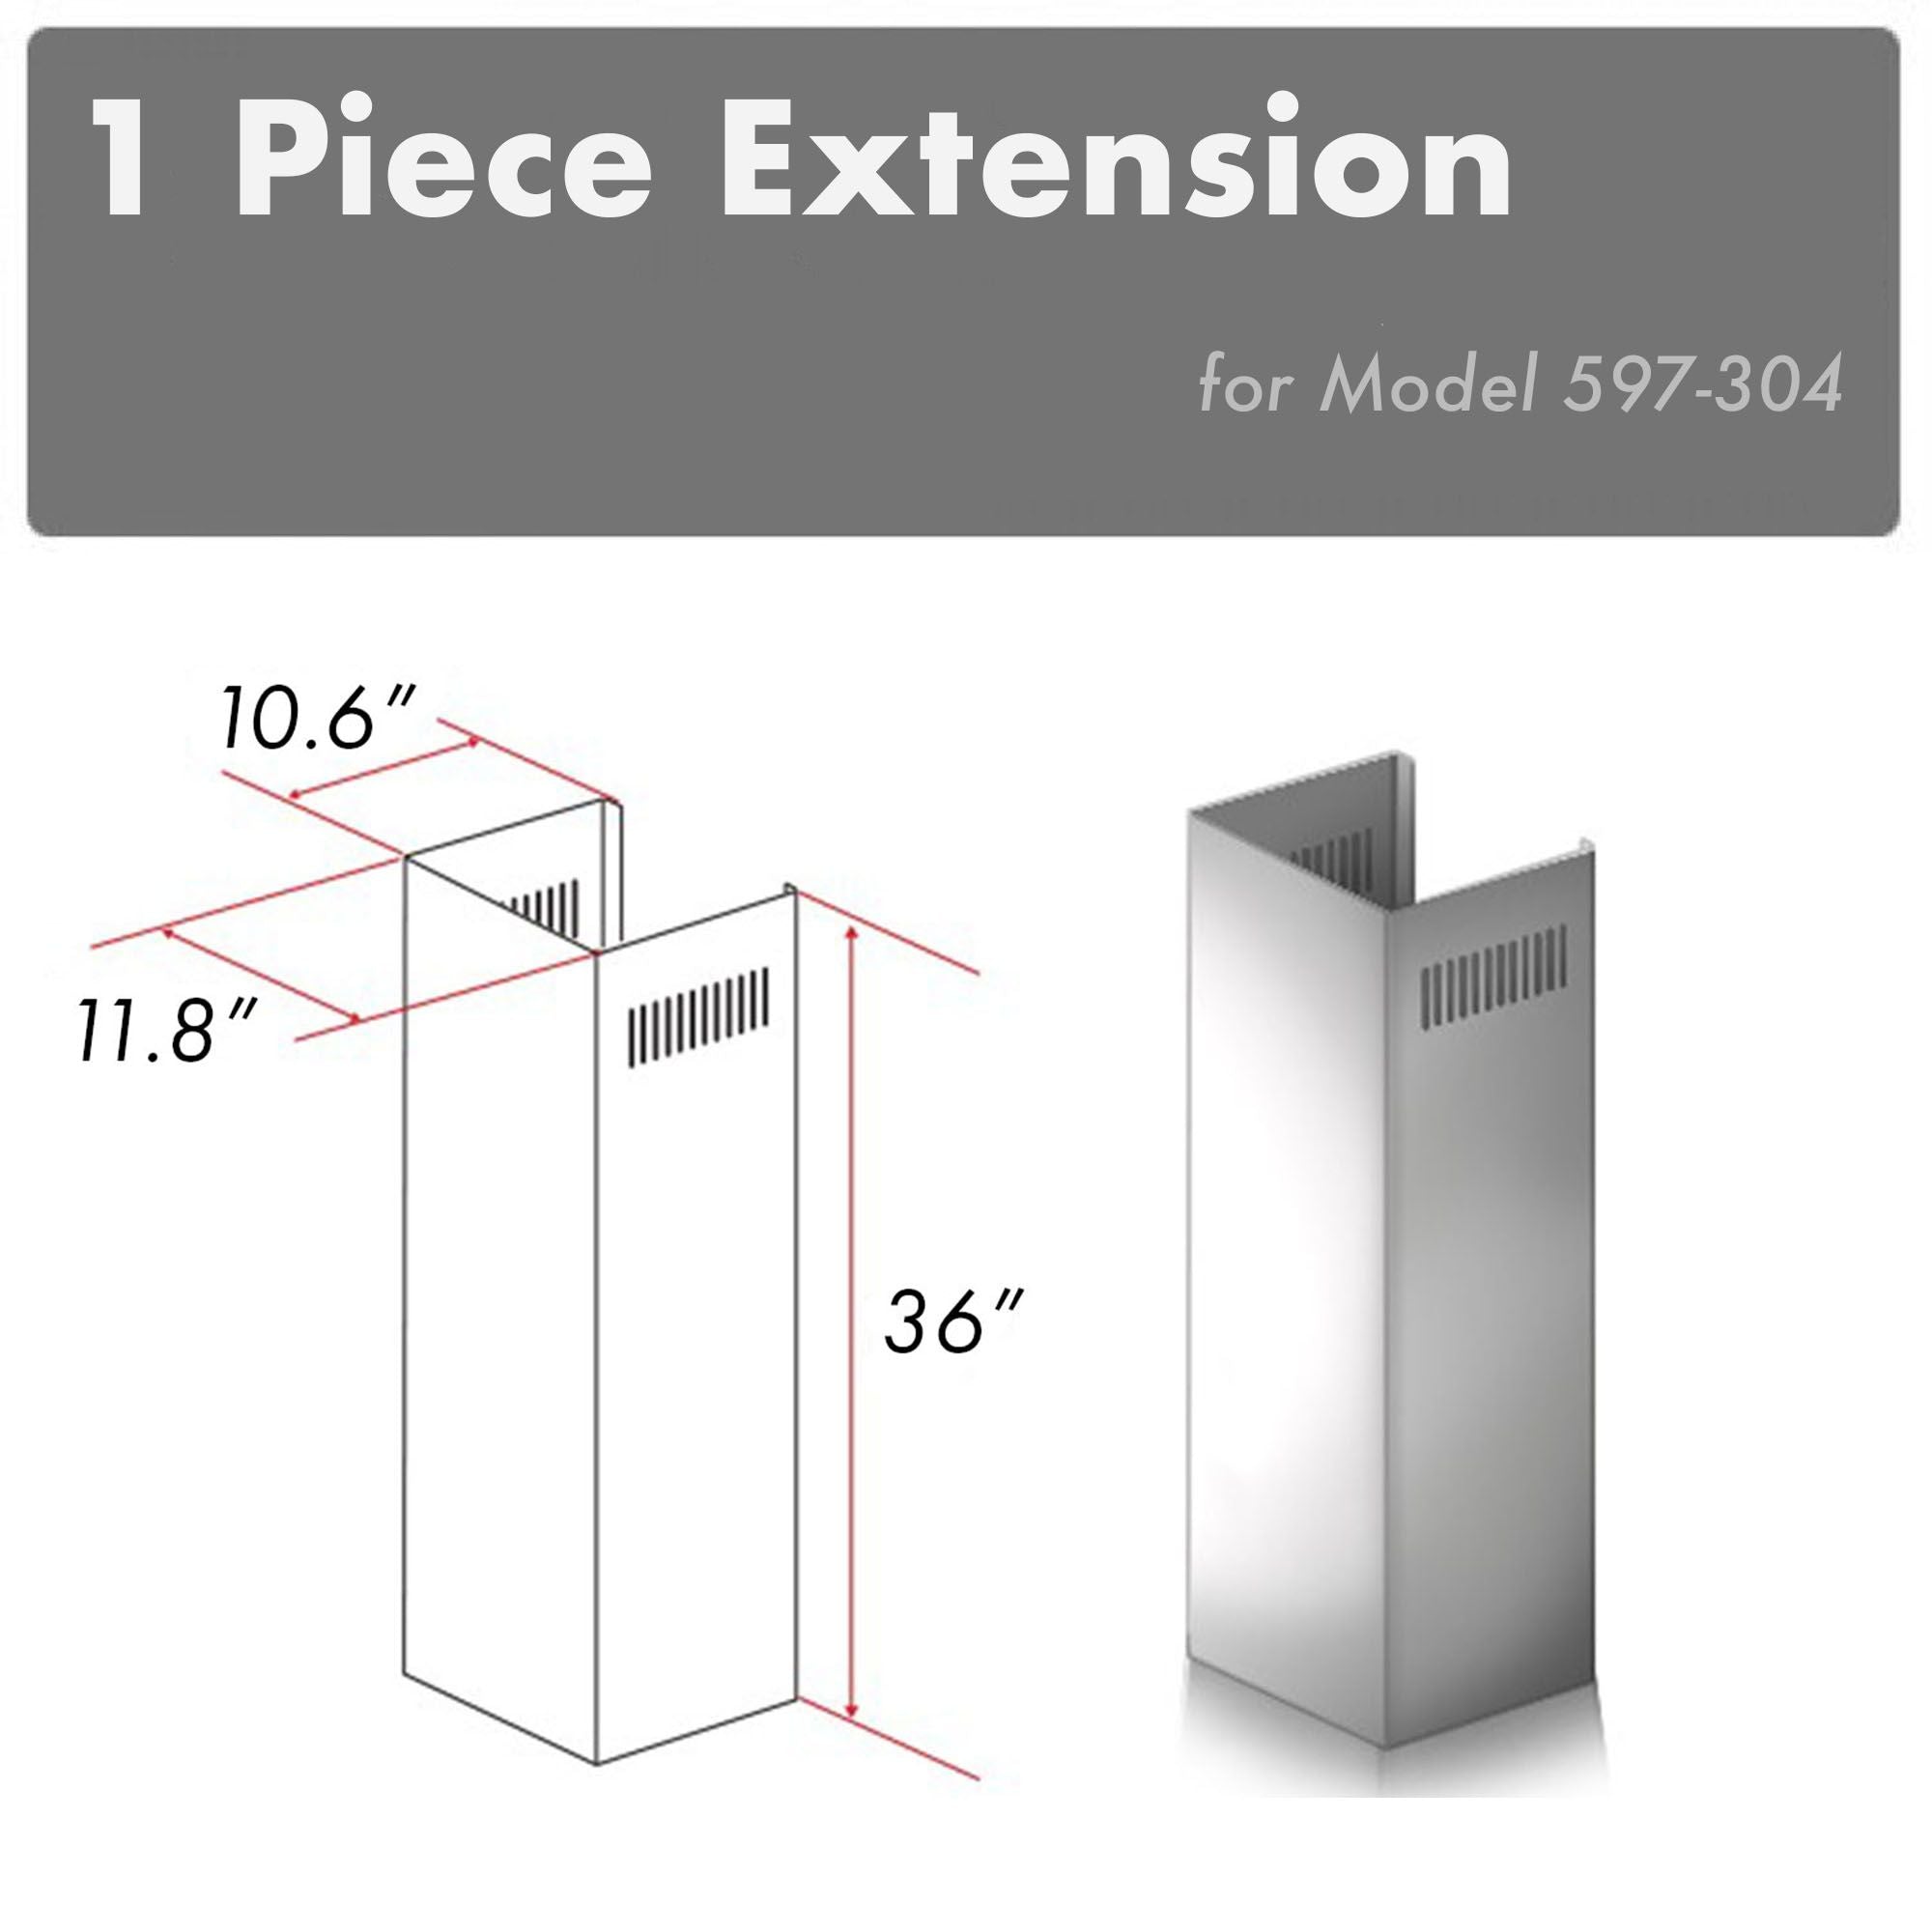 ZLINE 1-36" Chimney Extension for 9 ft. to 10 ft. Ceilings (1PCEXT-597-304)